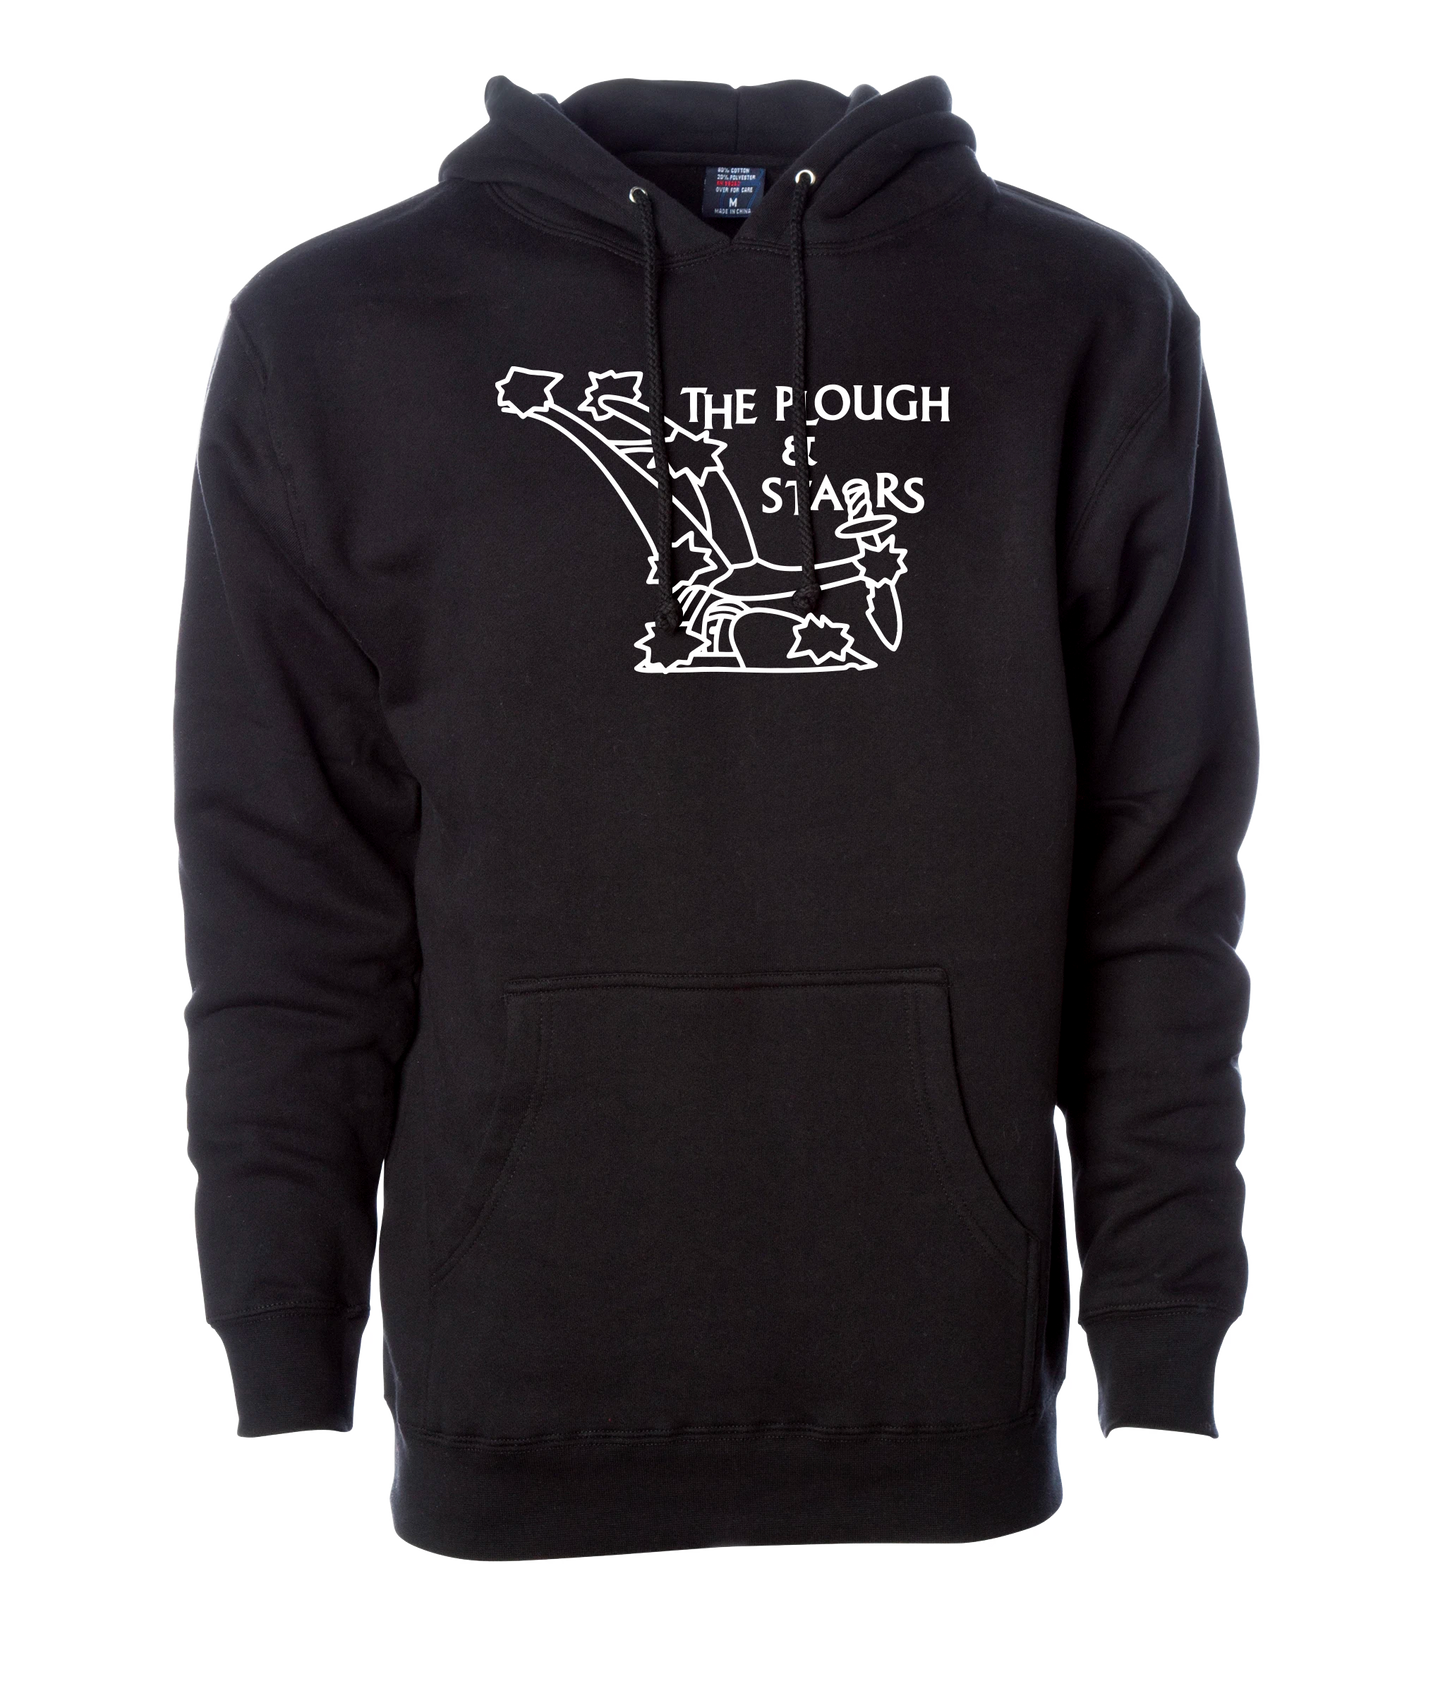 Black pullover hoodie with the logo of The Plough and Stars, Cambridge MA's best pub